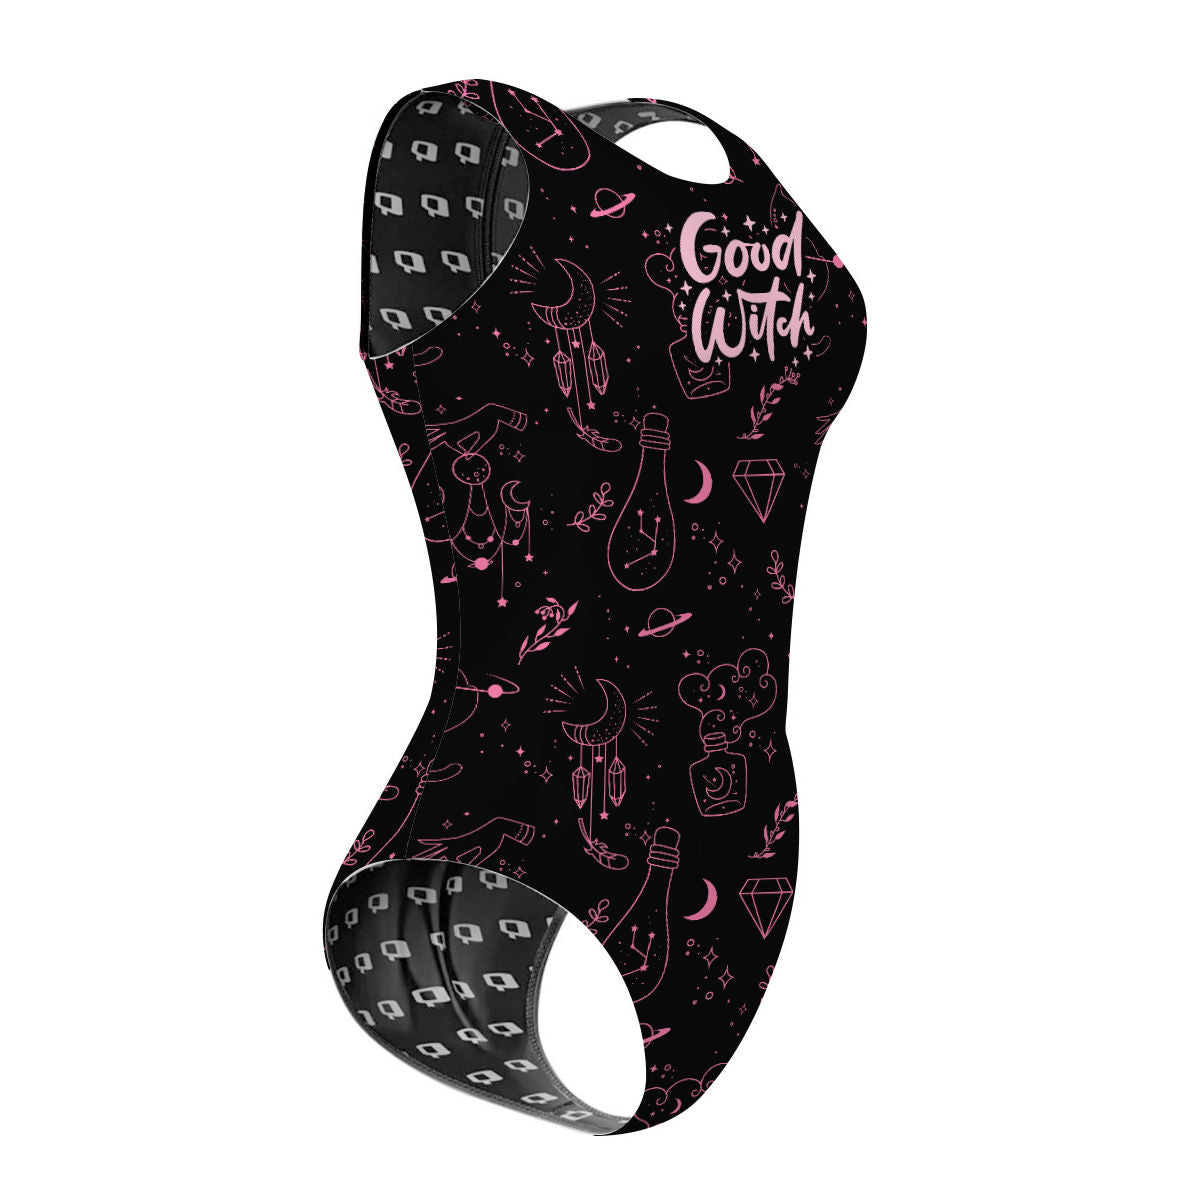 Good Witch - Women's Waterpolo Swimsuit Classic Cut